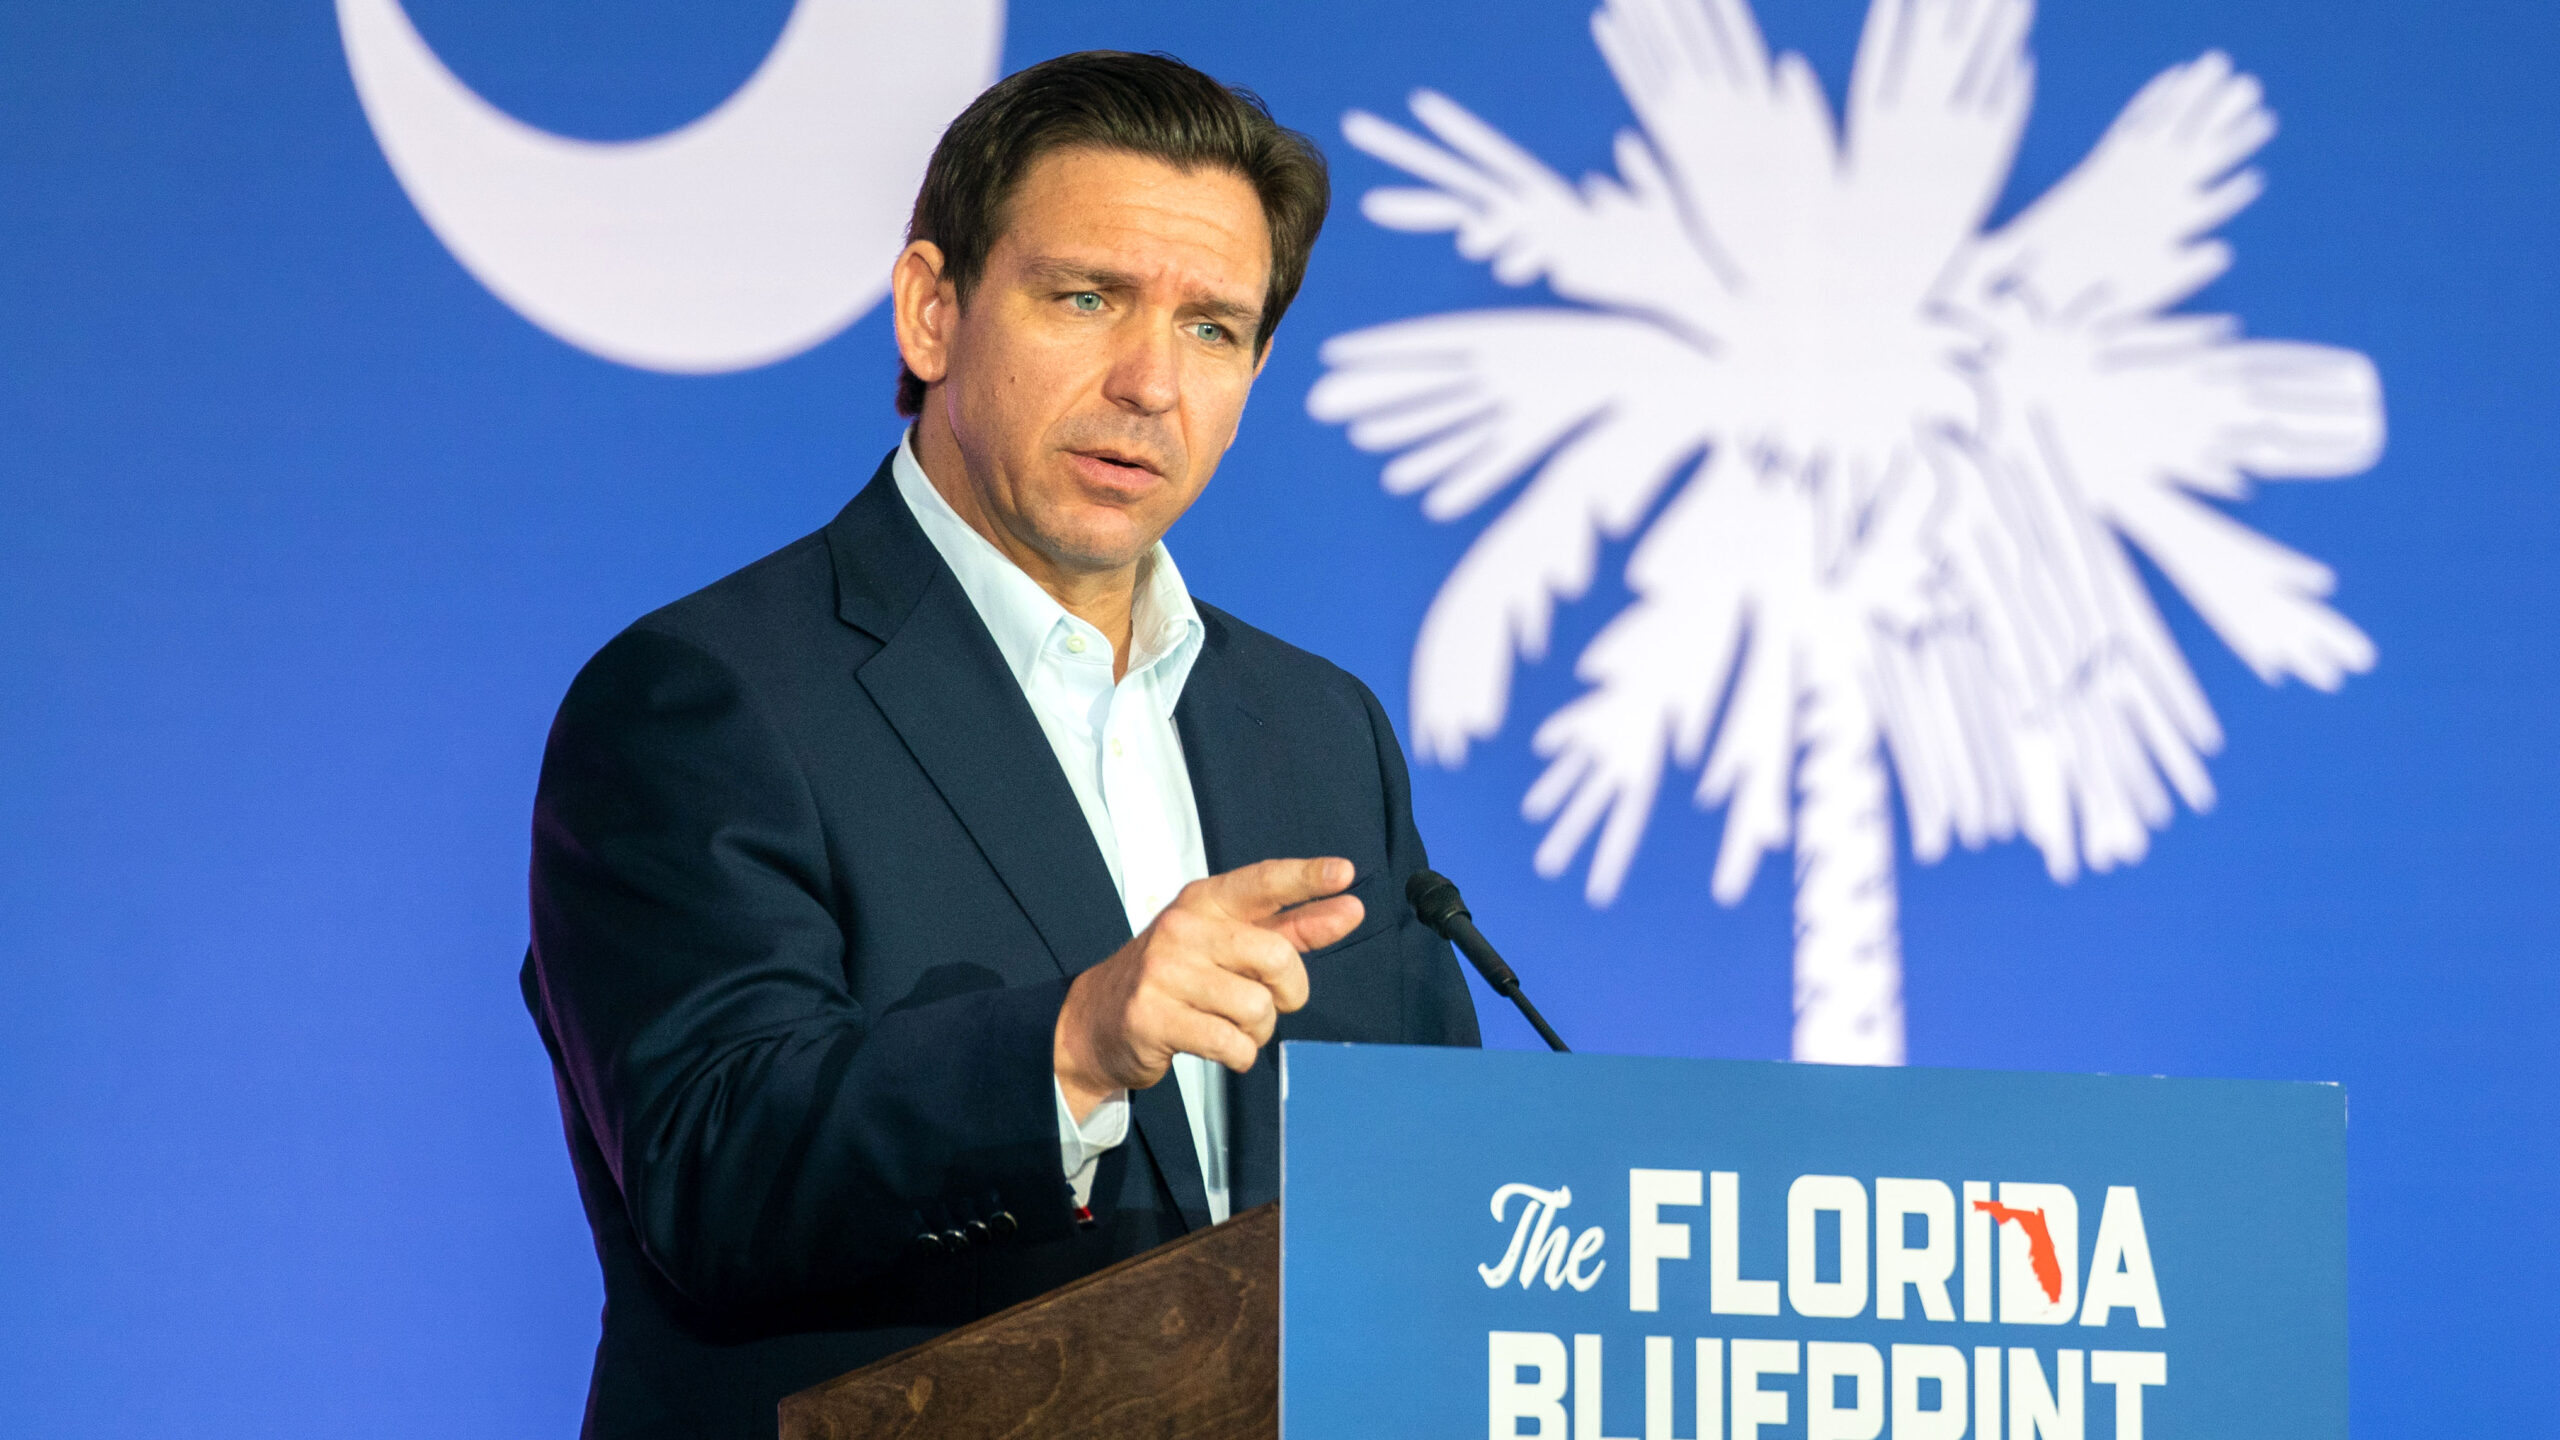 DeSantis Shreds Transgender Ideology: ‘A Total Fraud,’ It’s A ‘Lie’ That Must Be Pushed Backed On